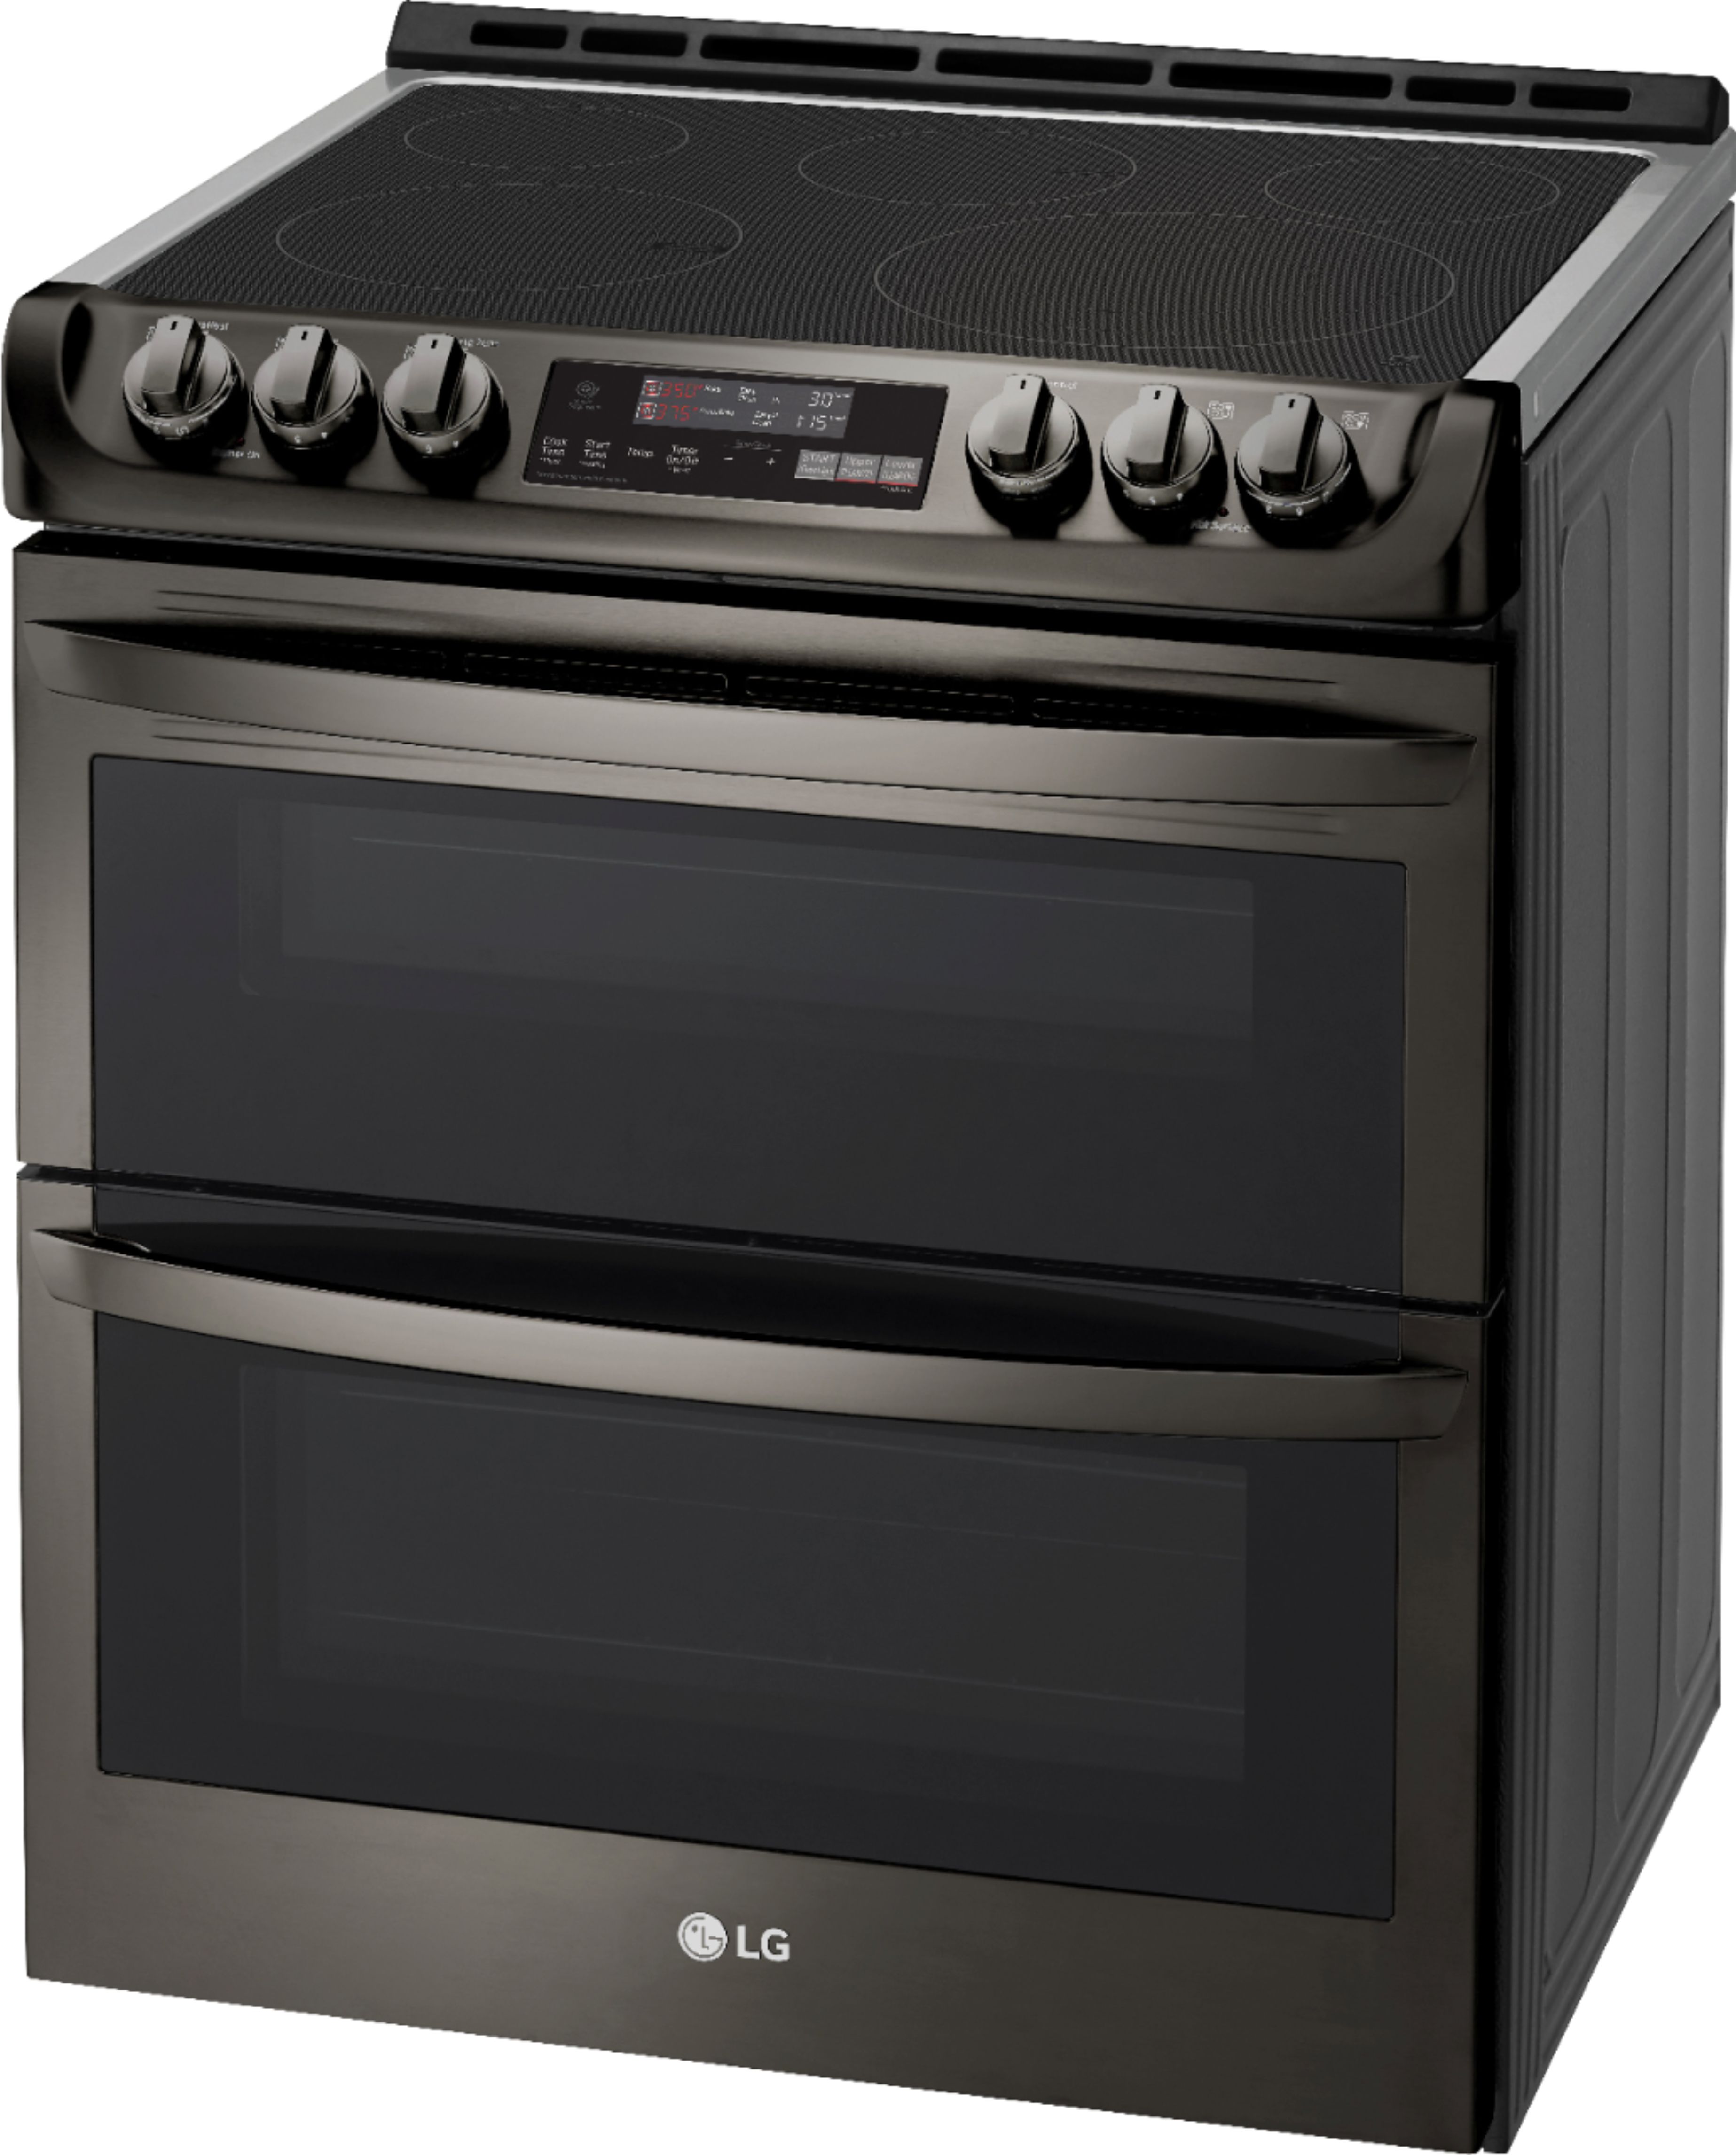 LG 7.3 Cu. Ft. Self-Clean Slide-In Double Oven Electric Smart Wi-Fi